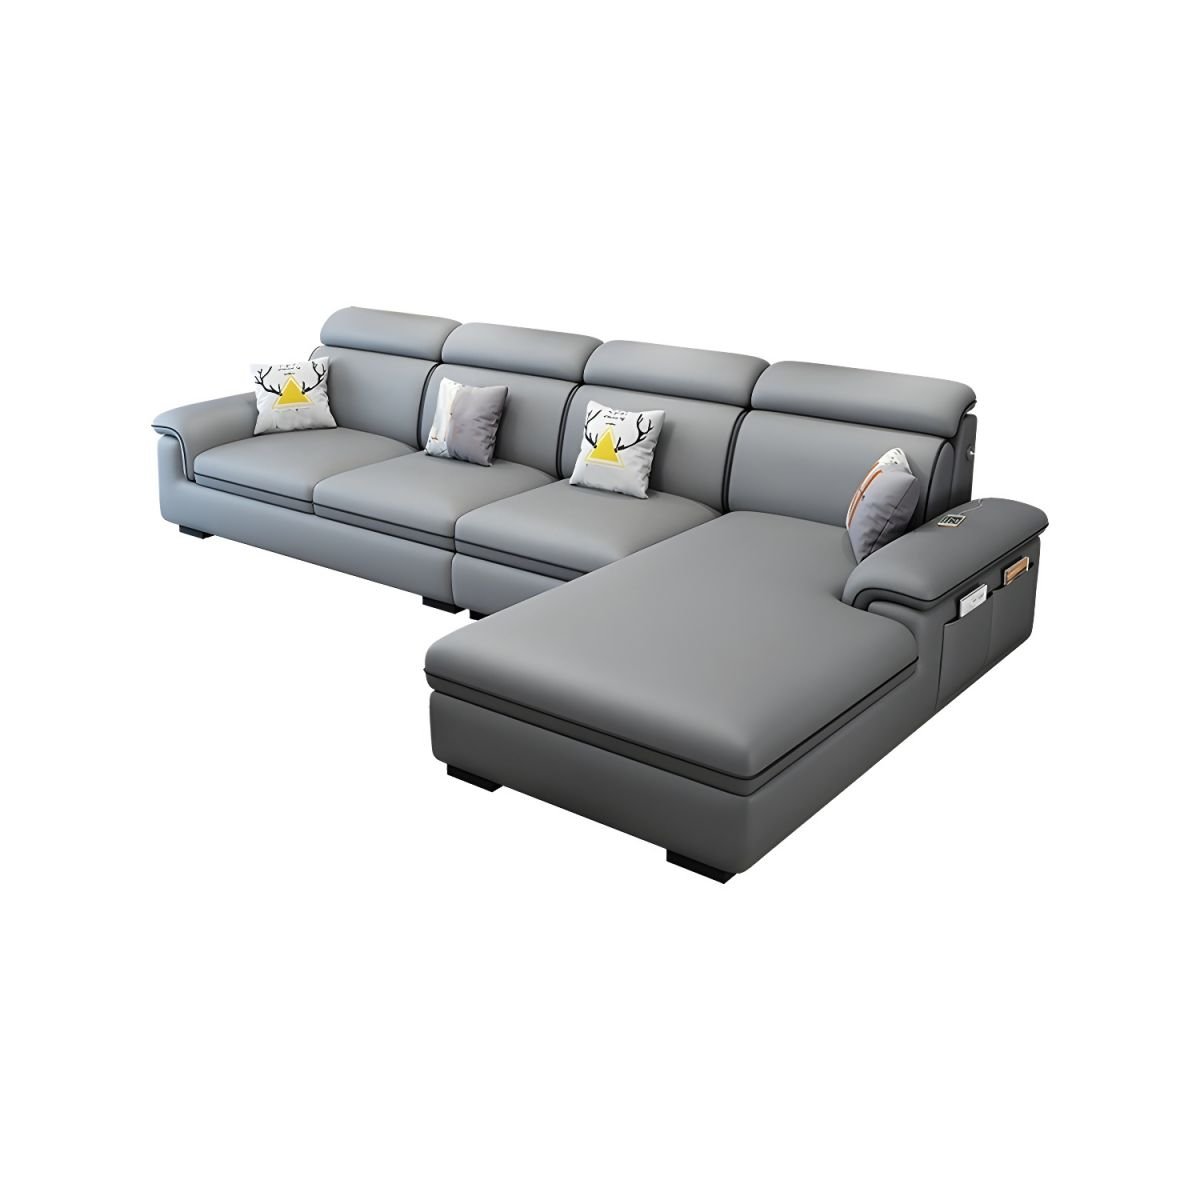 Wooden Modern 9 Feet L-Shape Sectionals No Distressing Seats 4 Storage Included Sofa Chaise - Tech Cloth Grey Right